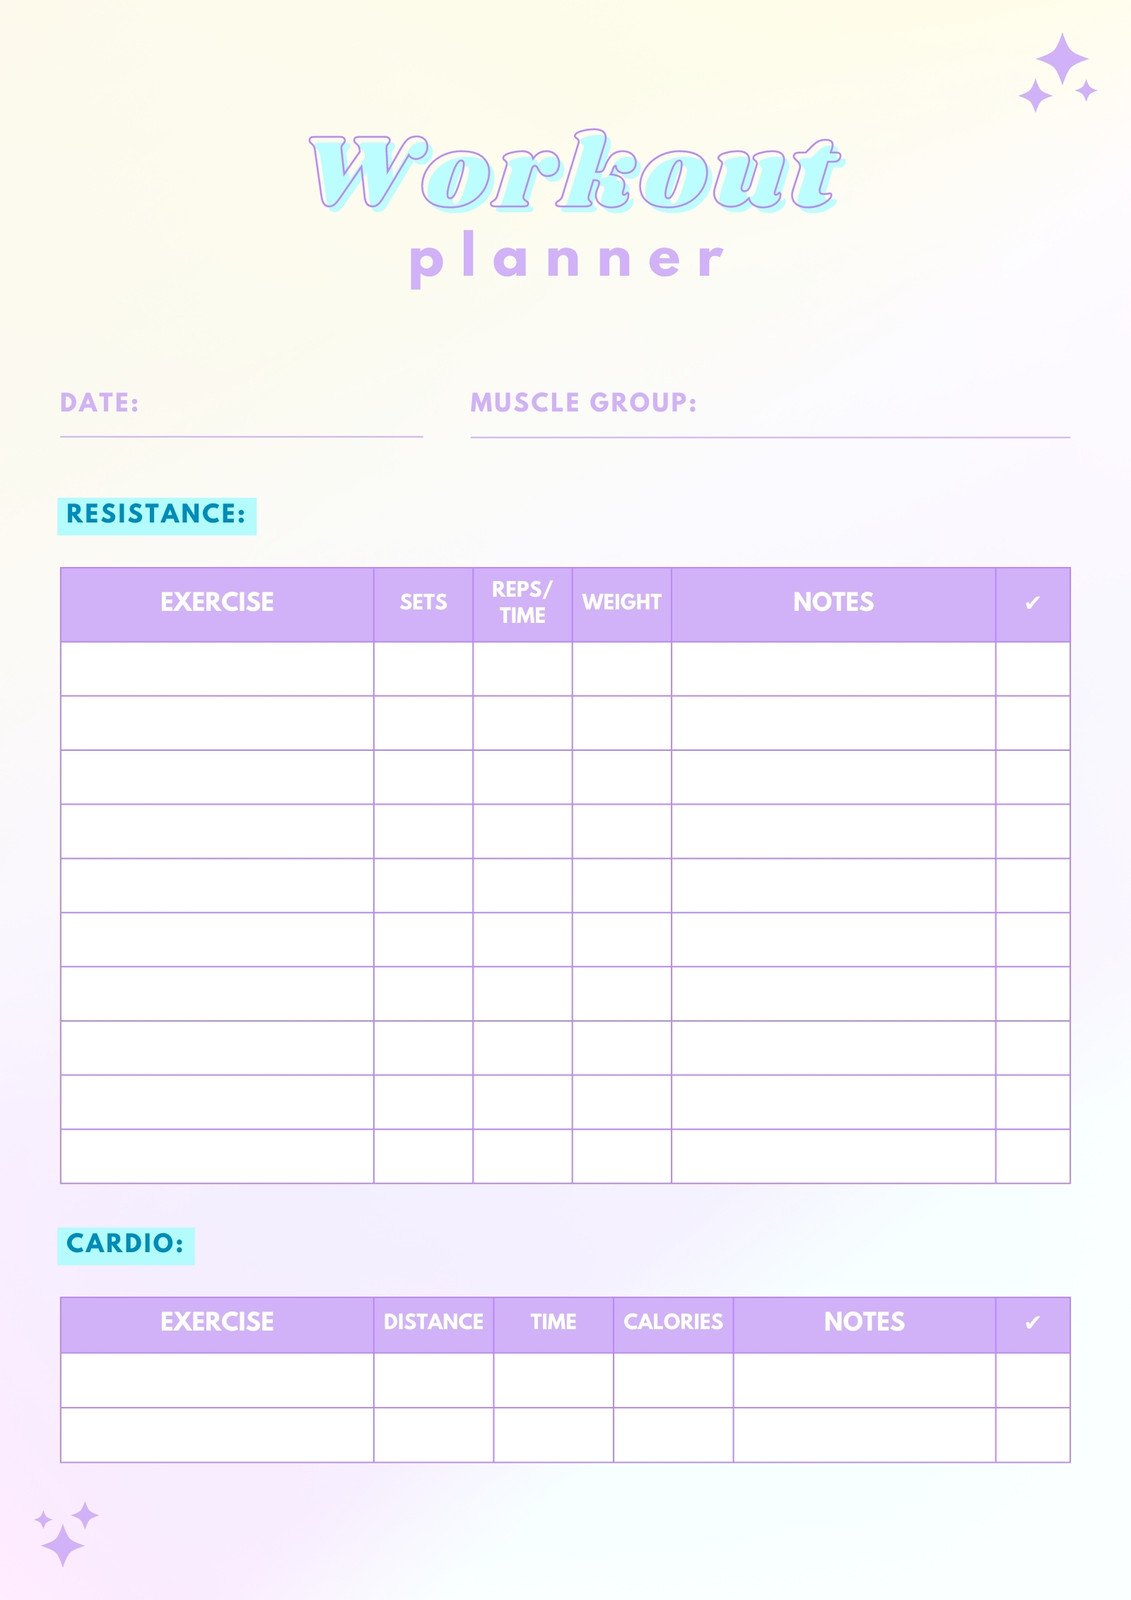 FREE Workout Schedule Template - Download in Word, Google Docs